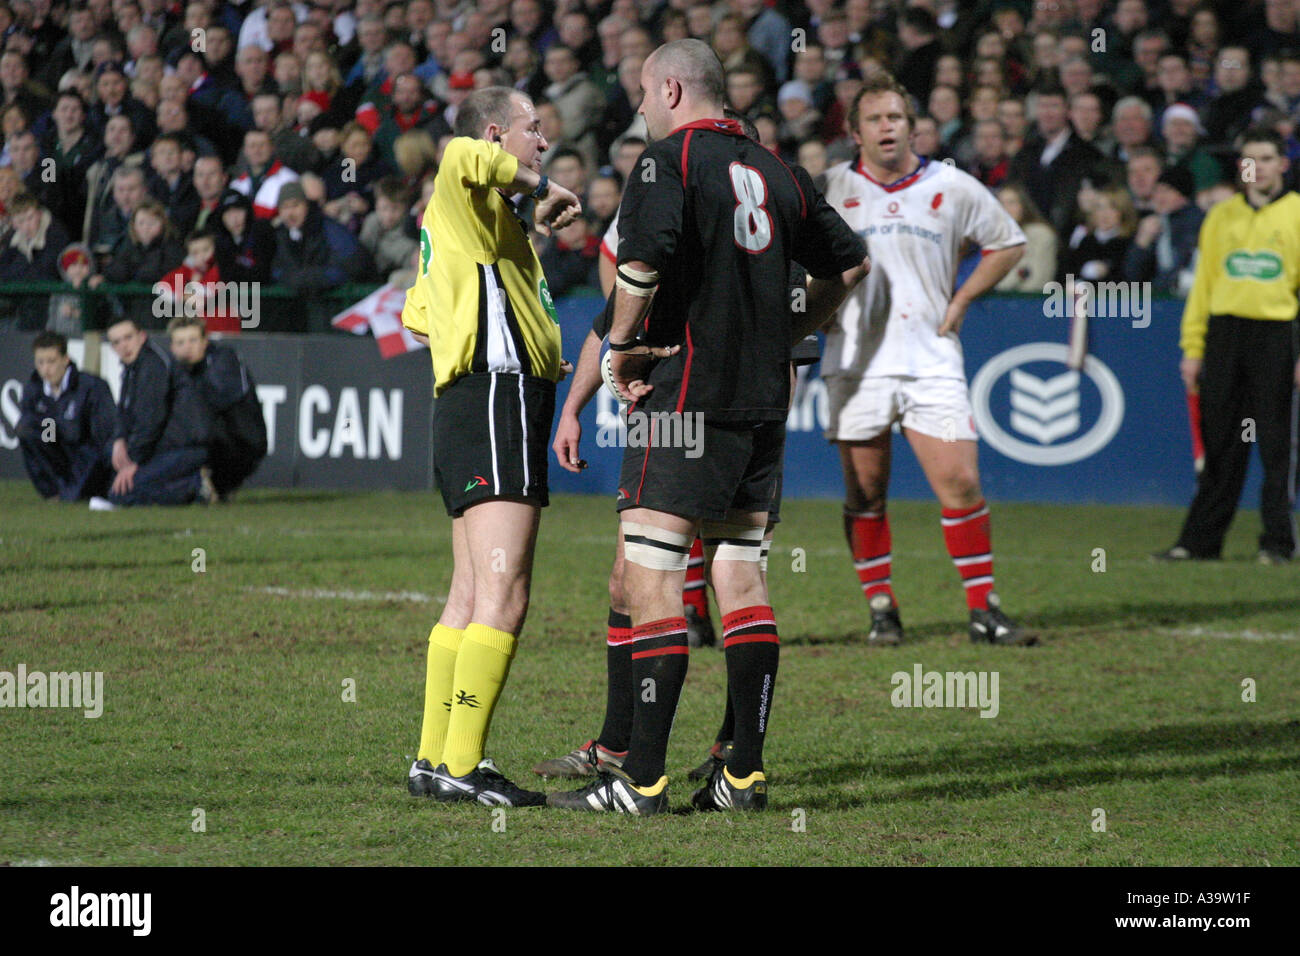 Rugby Union referee signals elbowing to competitor at Ulster v Edinburgh Celtic League game Ravenhill Northern Ireland Stock Photo